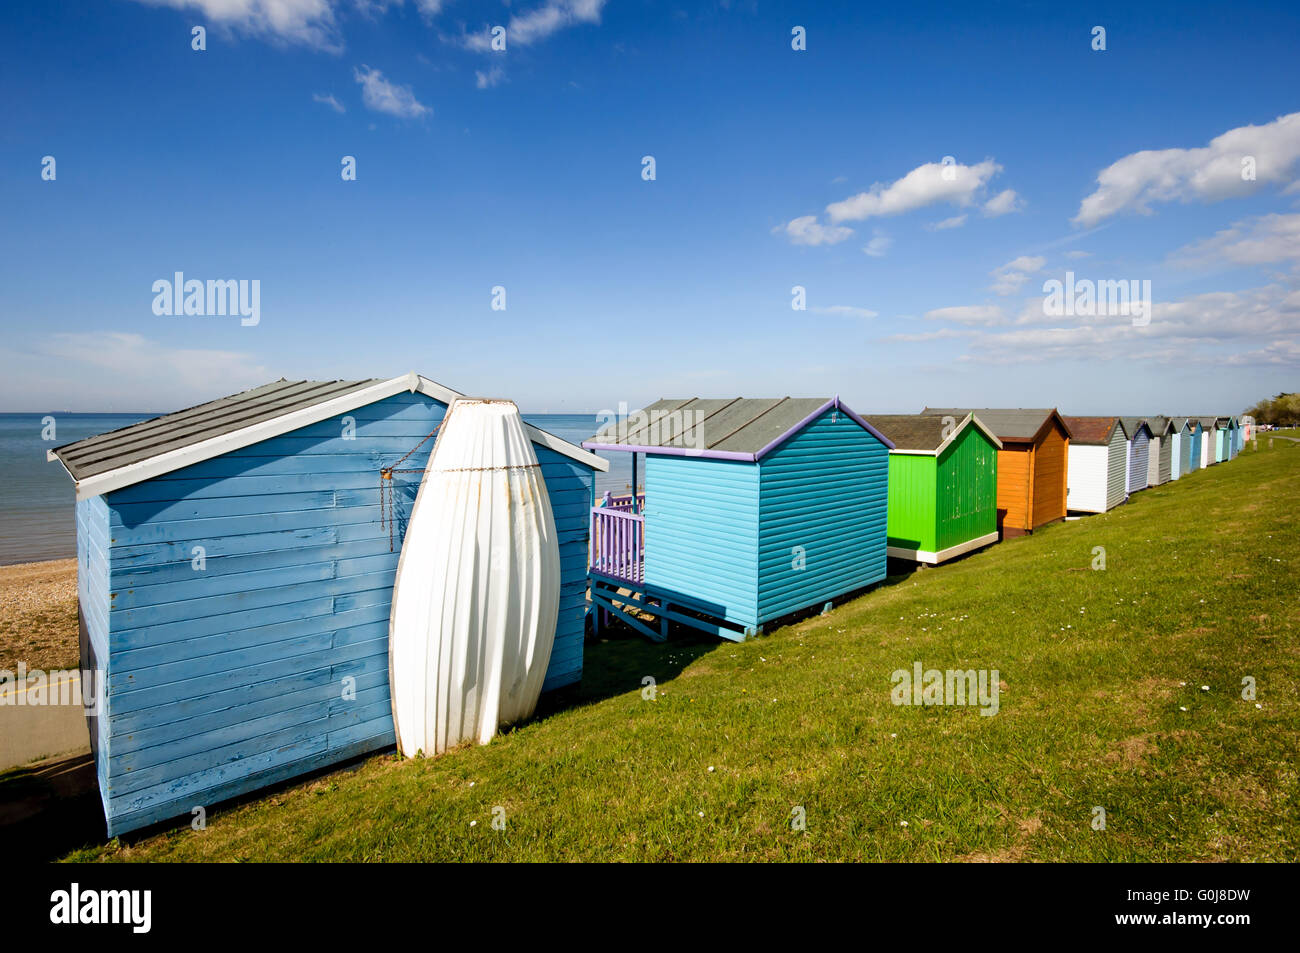 Huts along the beach in Whitstable, Kent, England Stock Photo